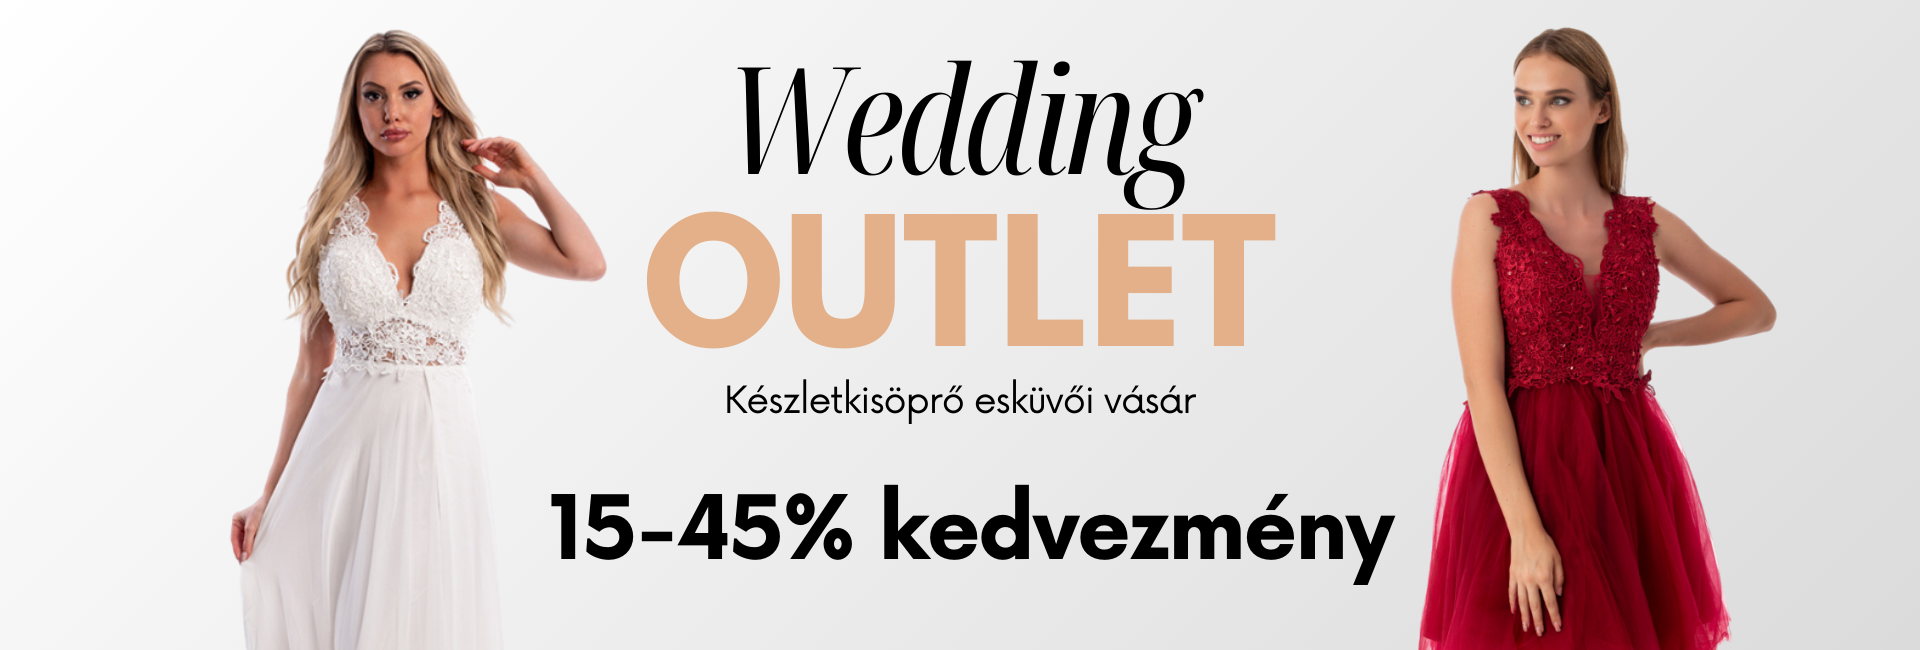 wedding outlet